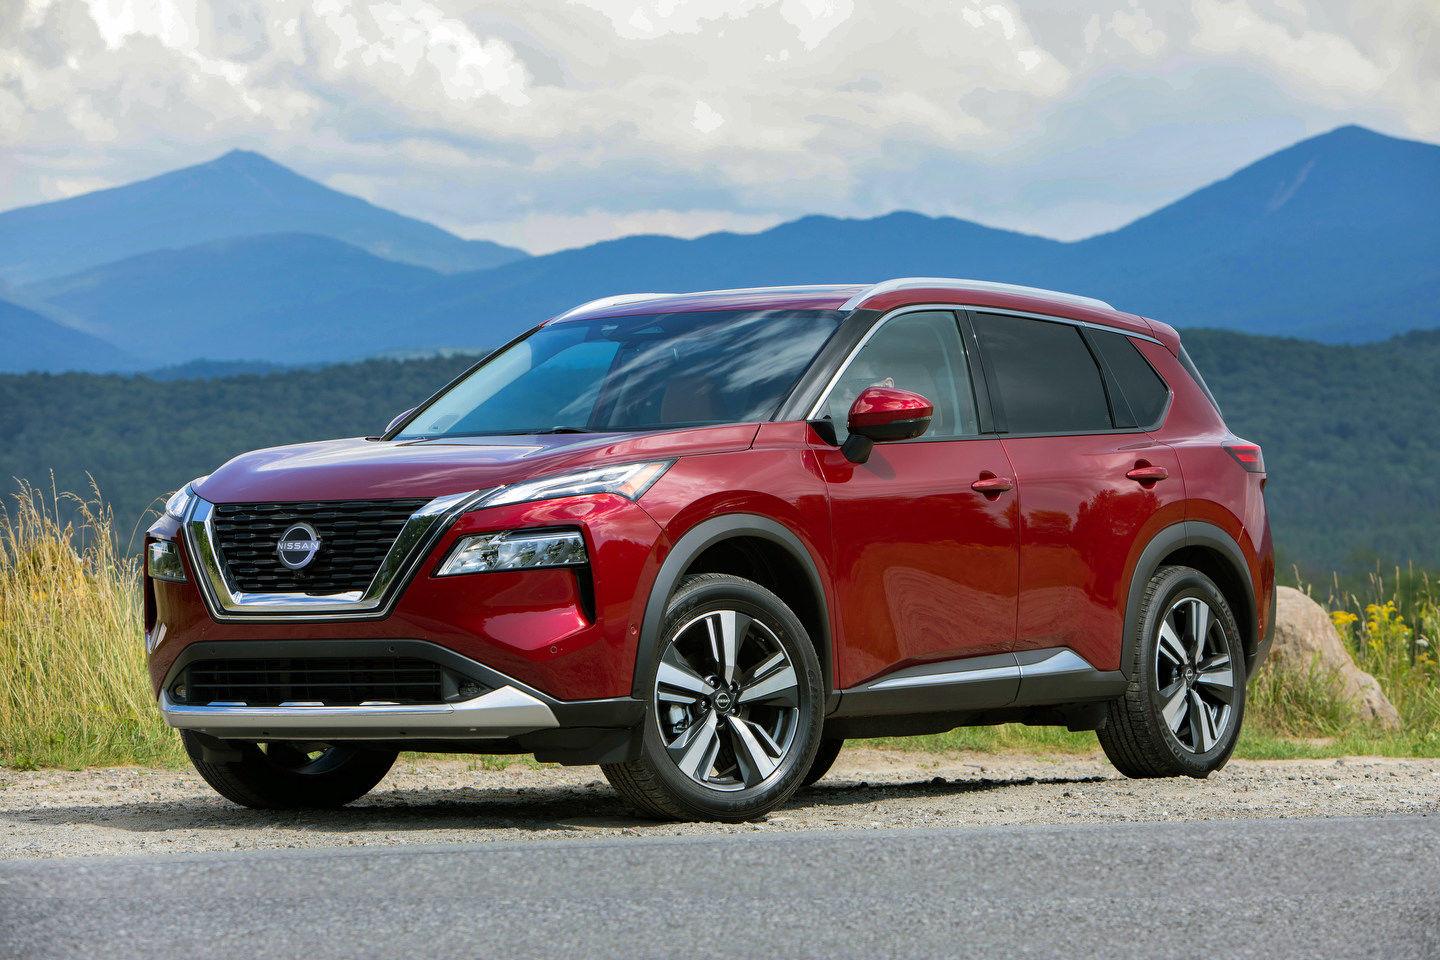 Why buy a 2023 Nissan Rogue instead of a 2023 Volkswagen Tiguan